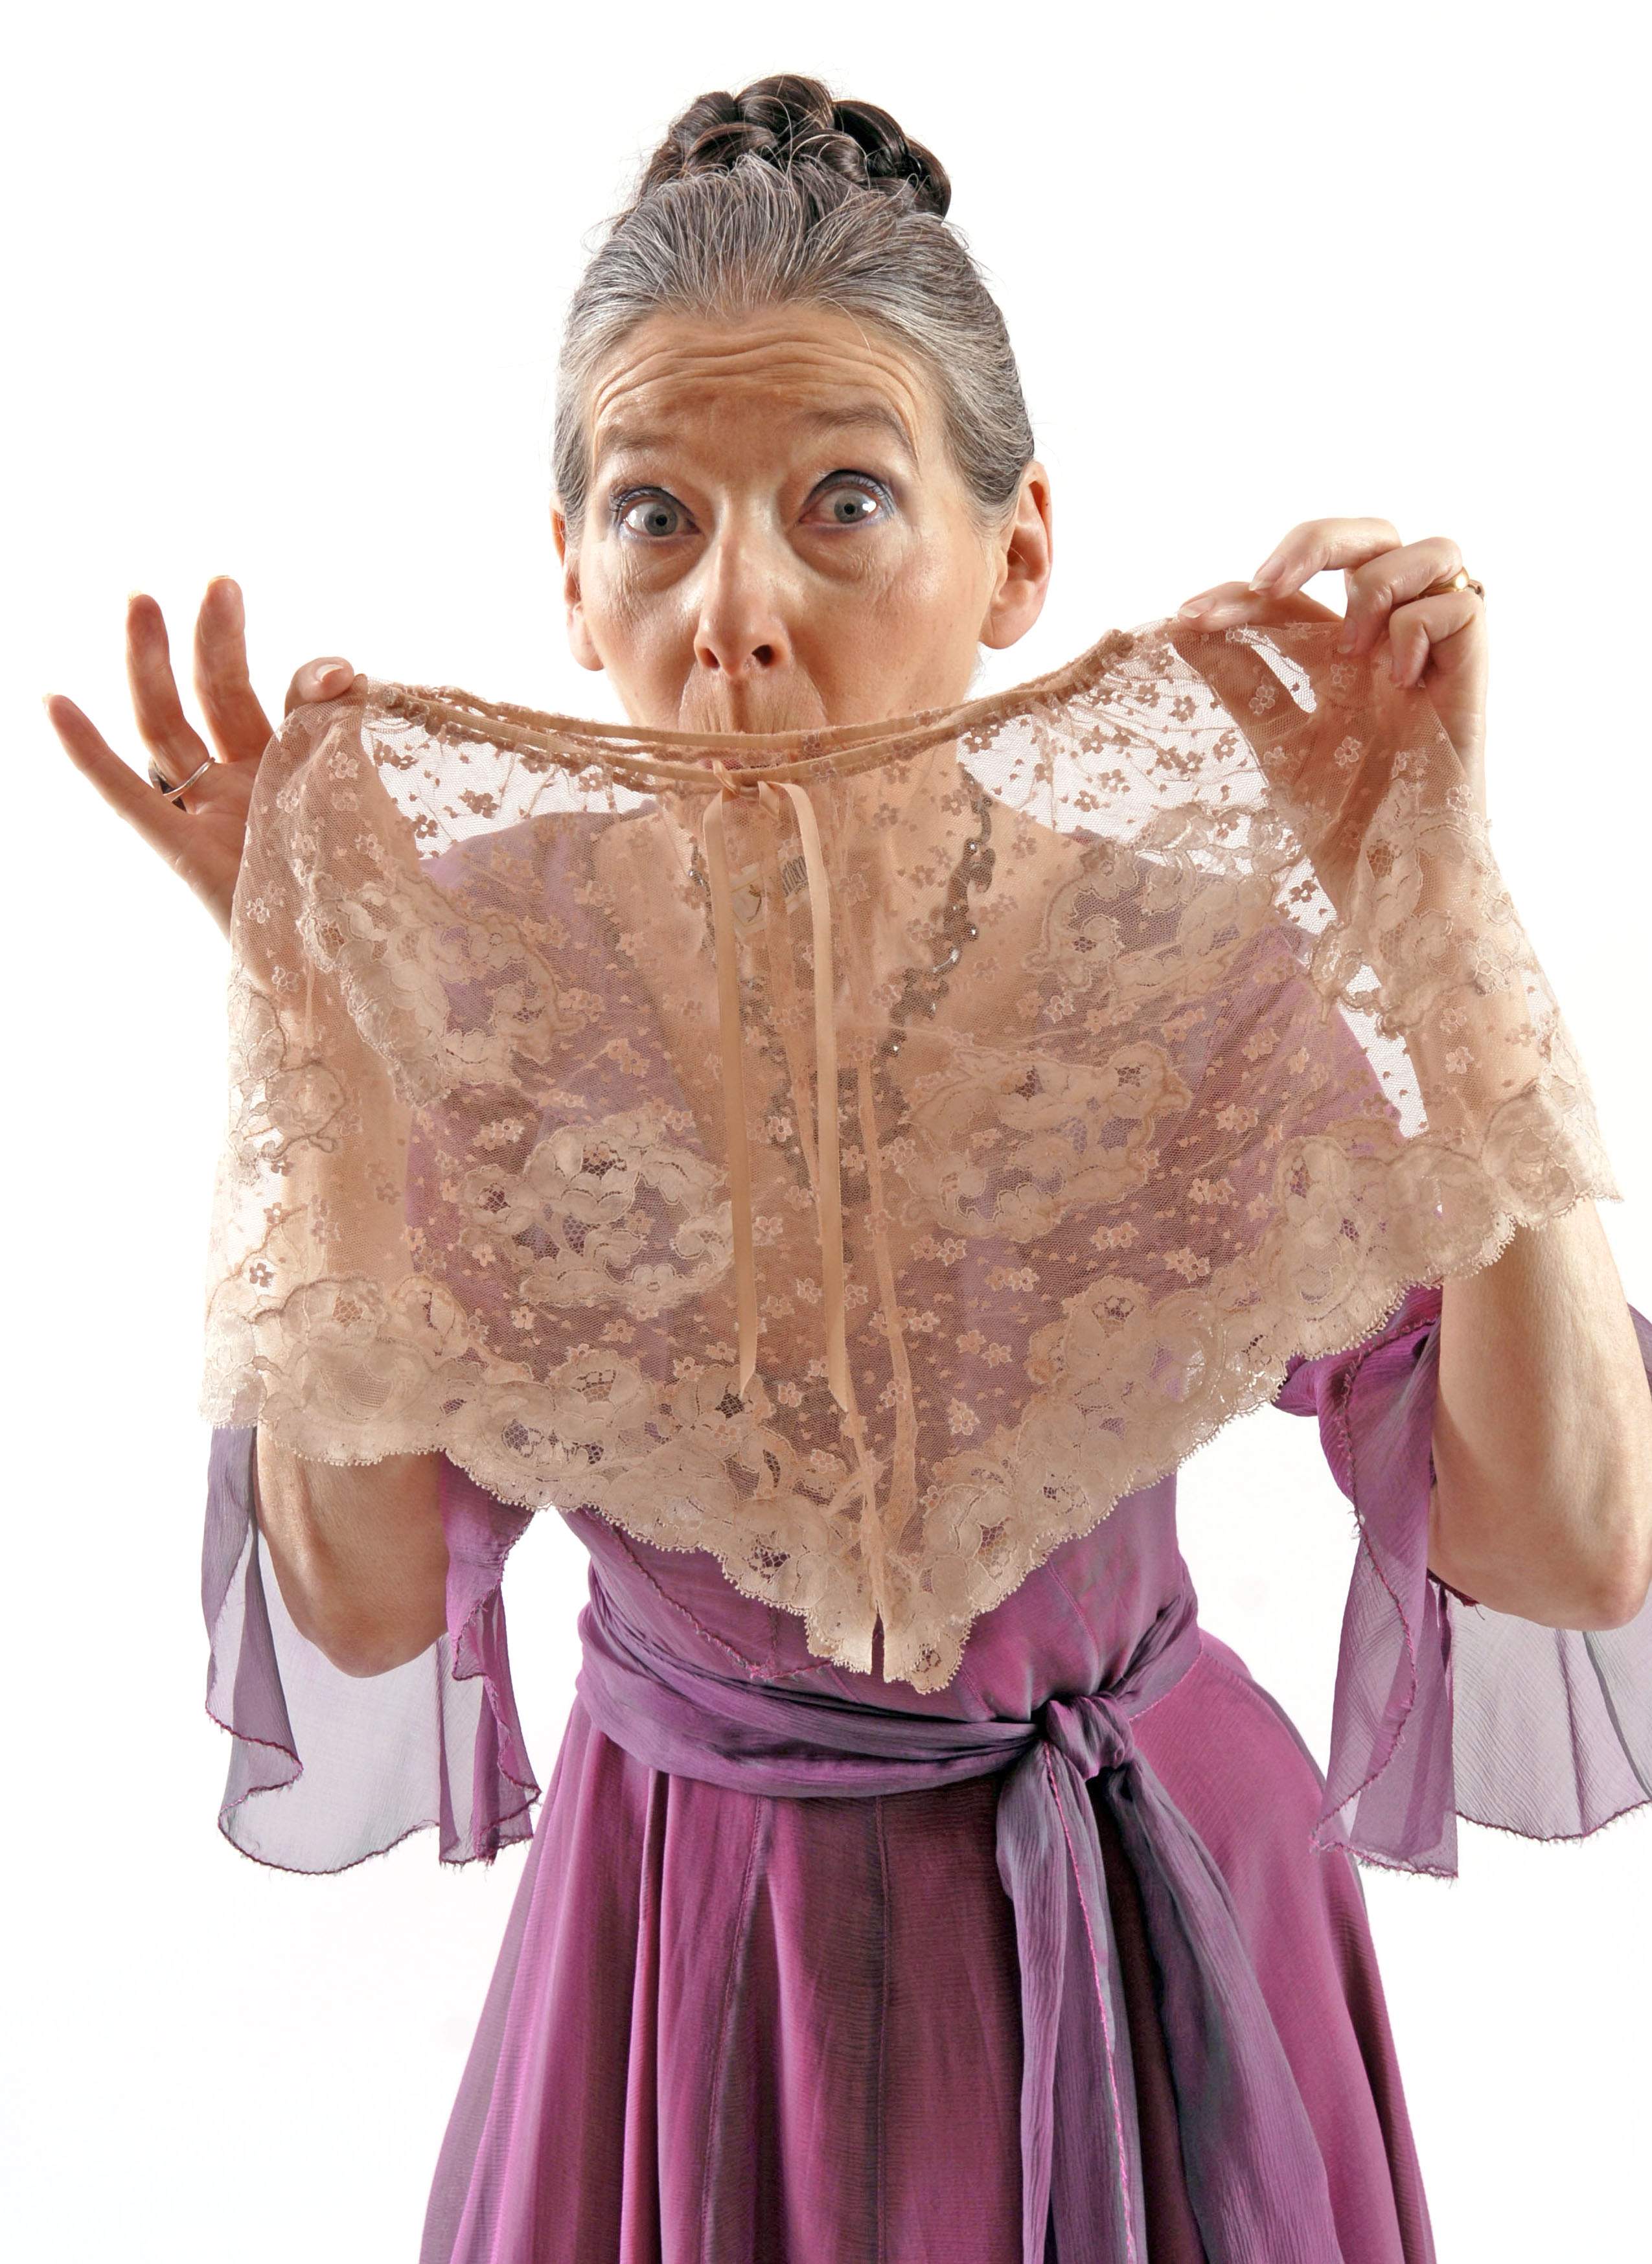 The Knicker Lady! Tickets now on sale - Womens Action Network Dorset